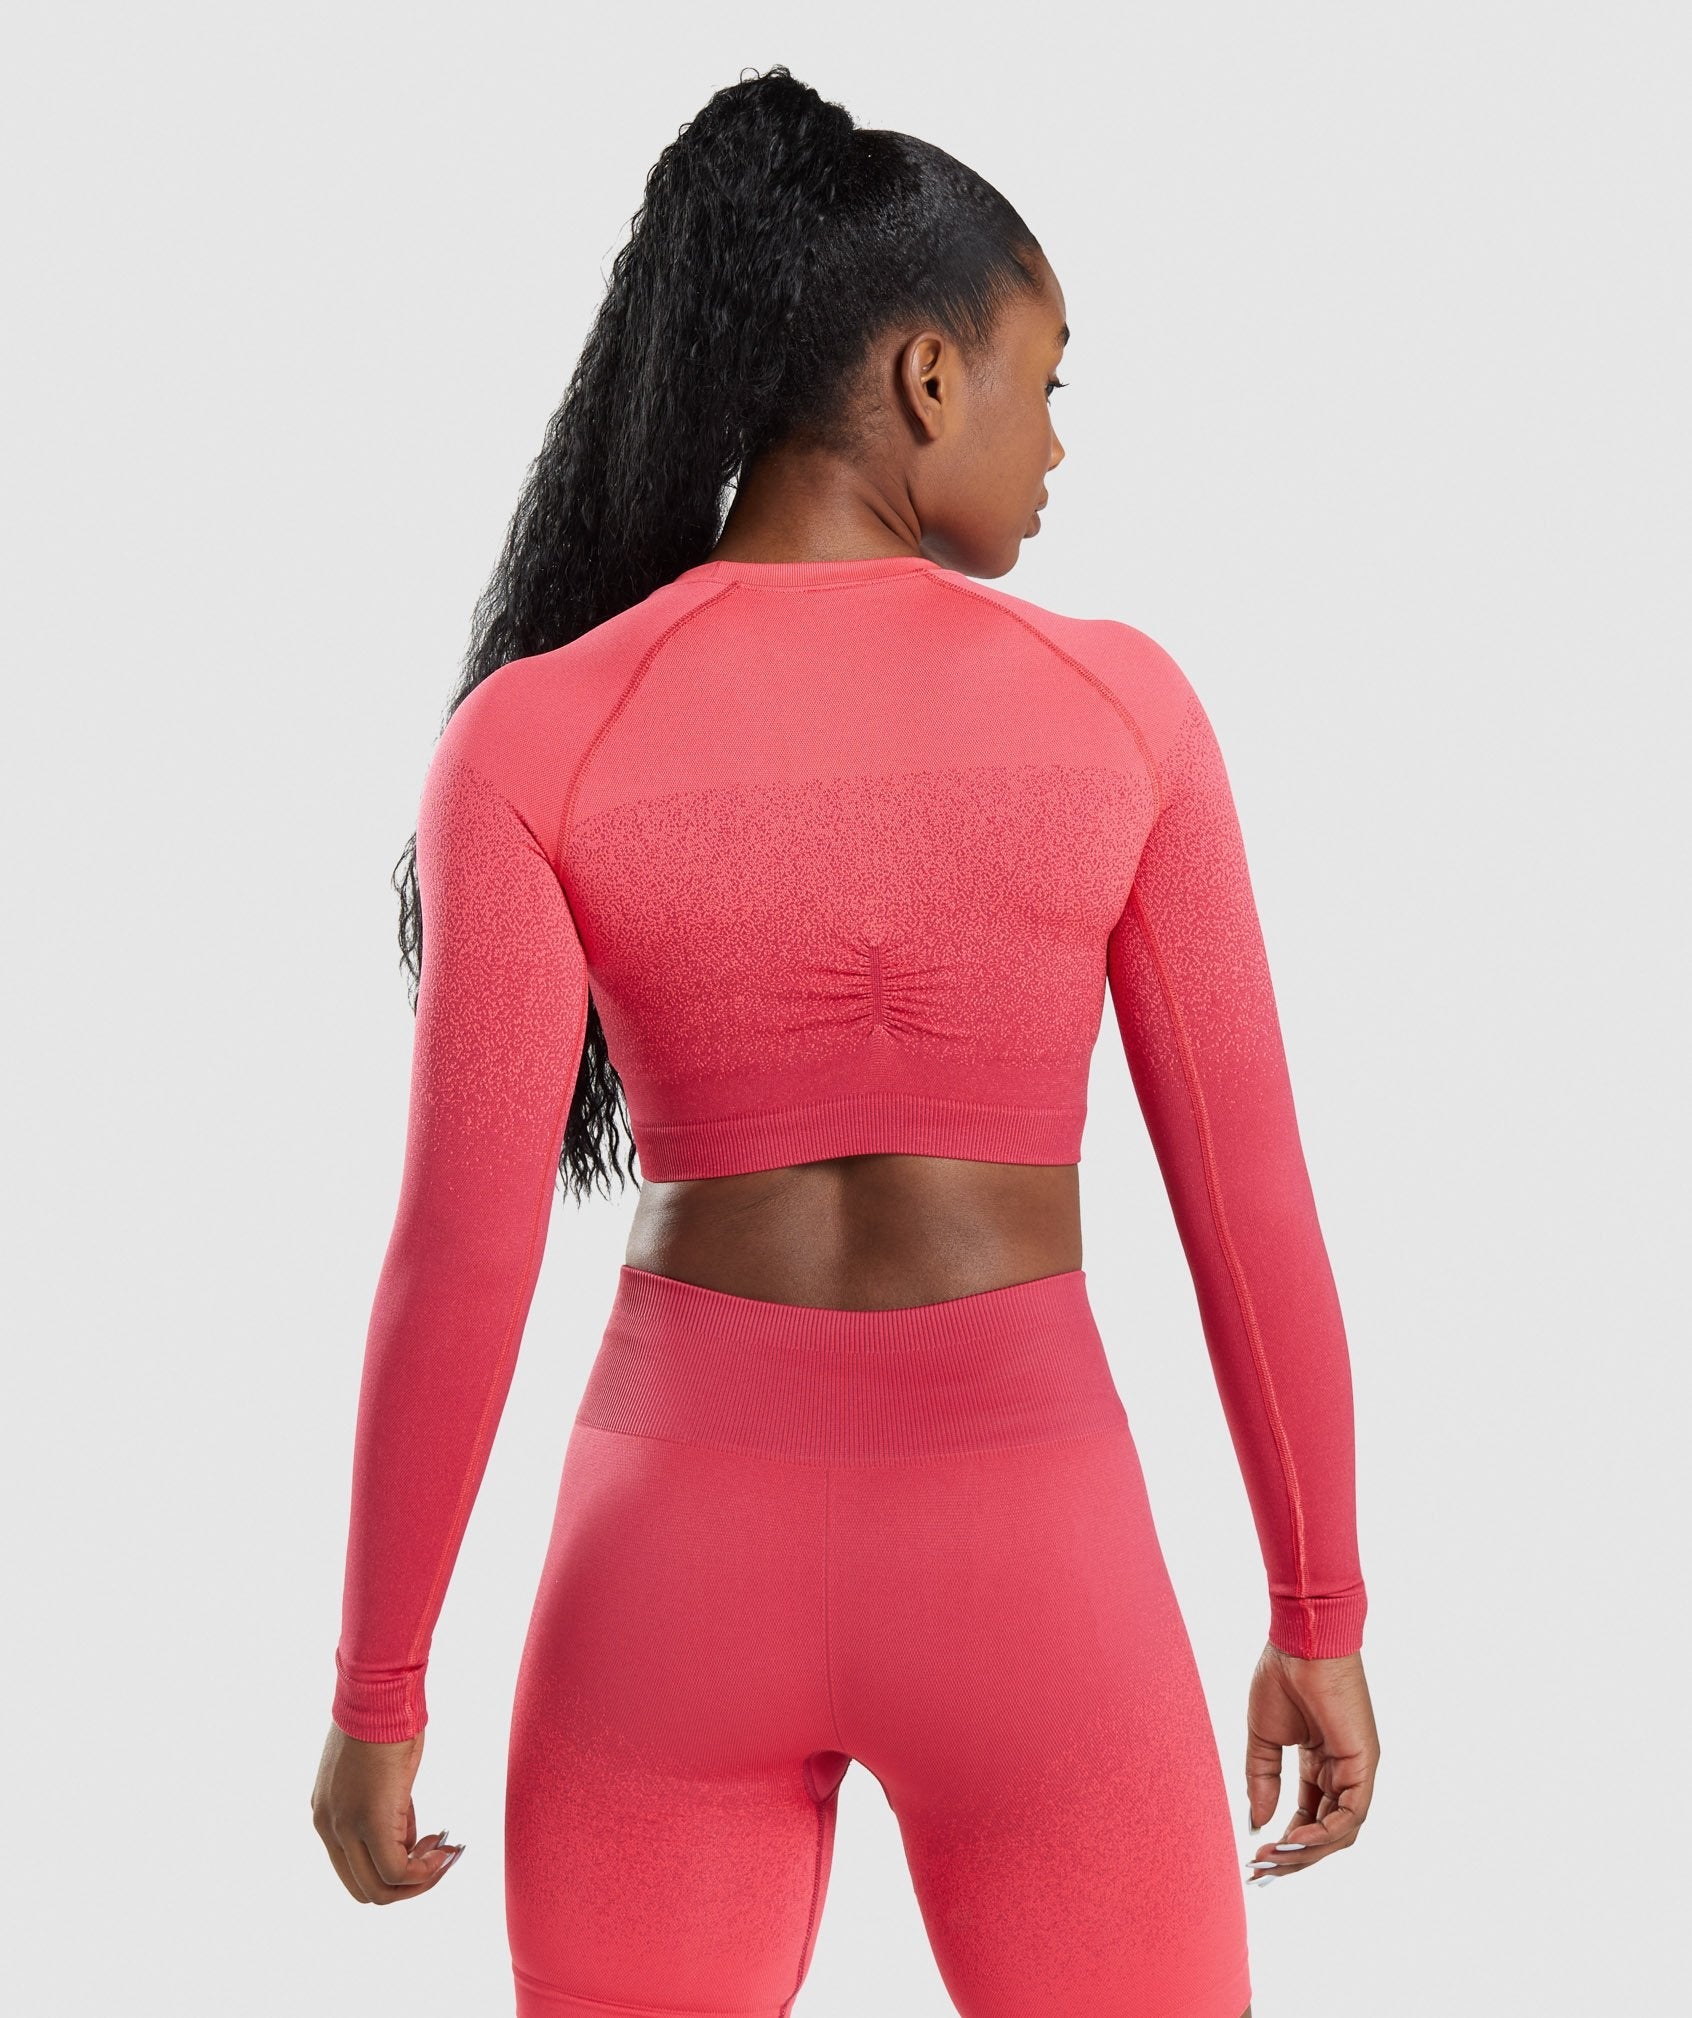 Adapt Ombre Seamless Long Sleeve Crop Top in Pink/Red - view 2